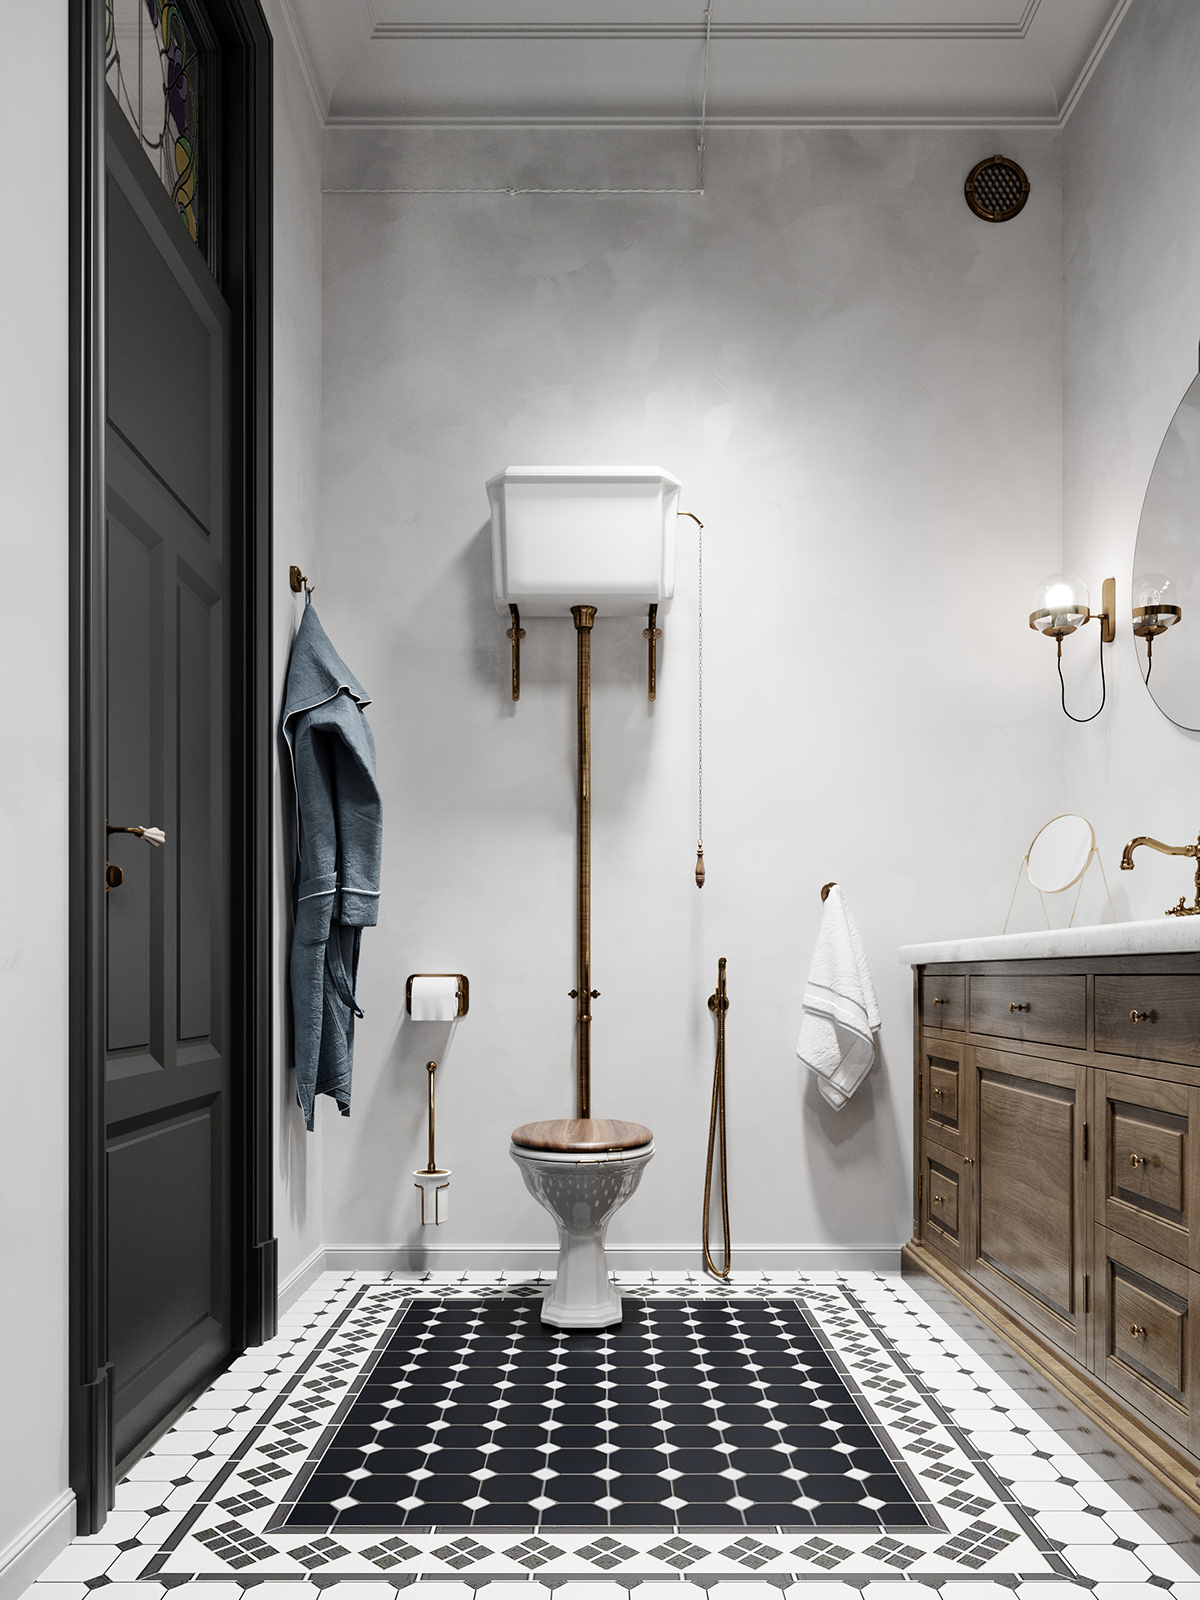 The toilet's foot is polished and meticulously crafted, and an extravagant copper faucet system is installed.